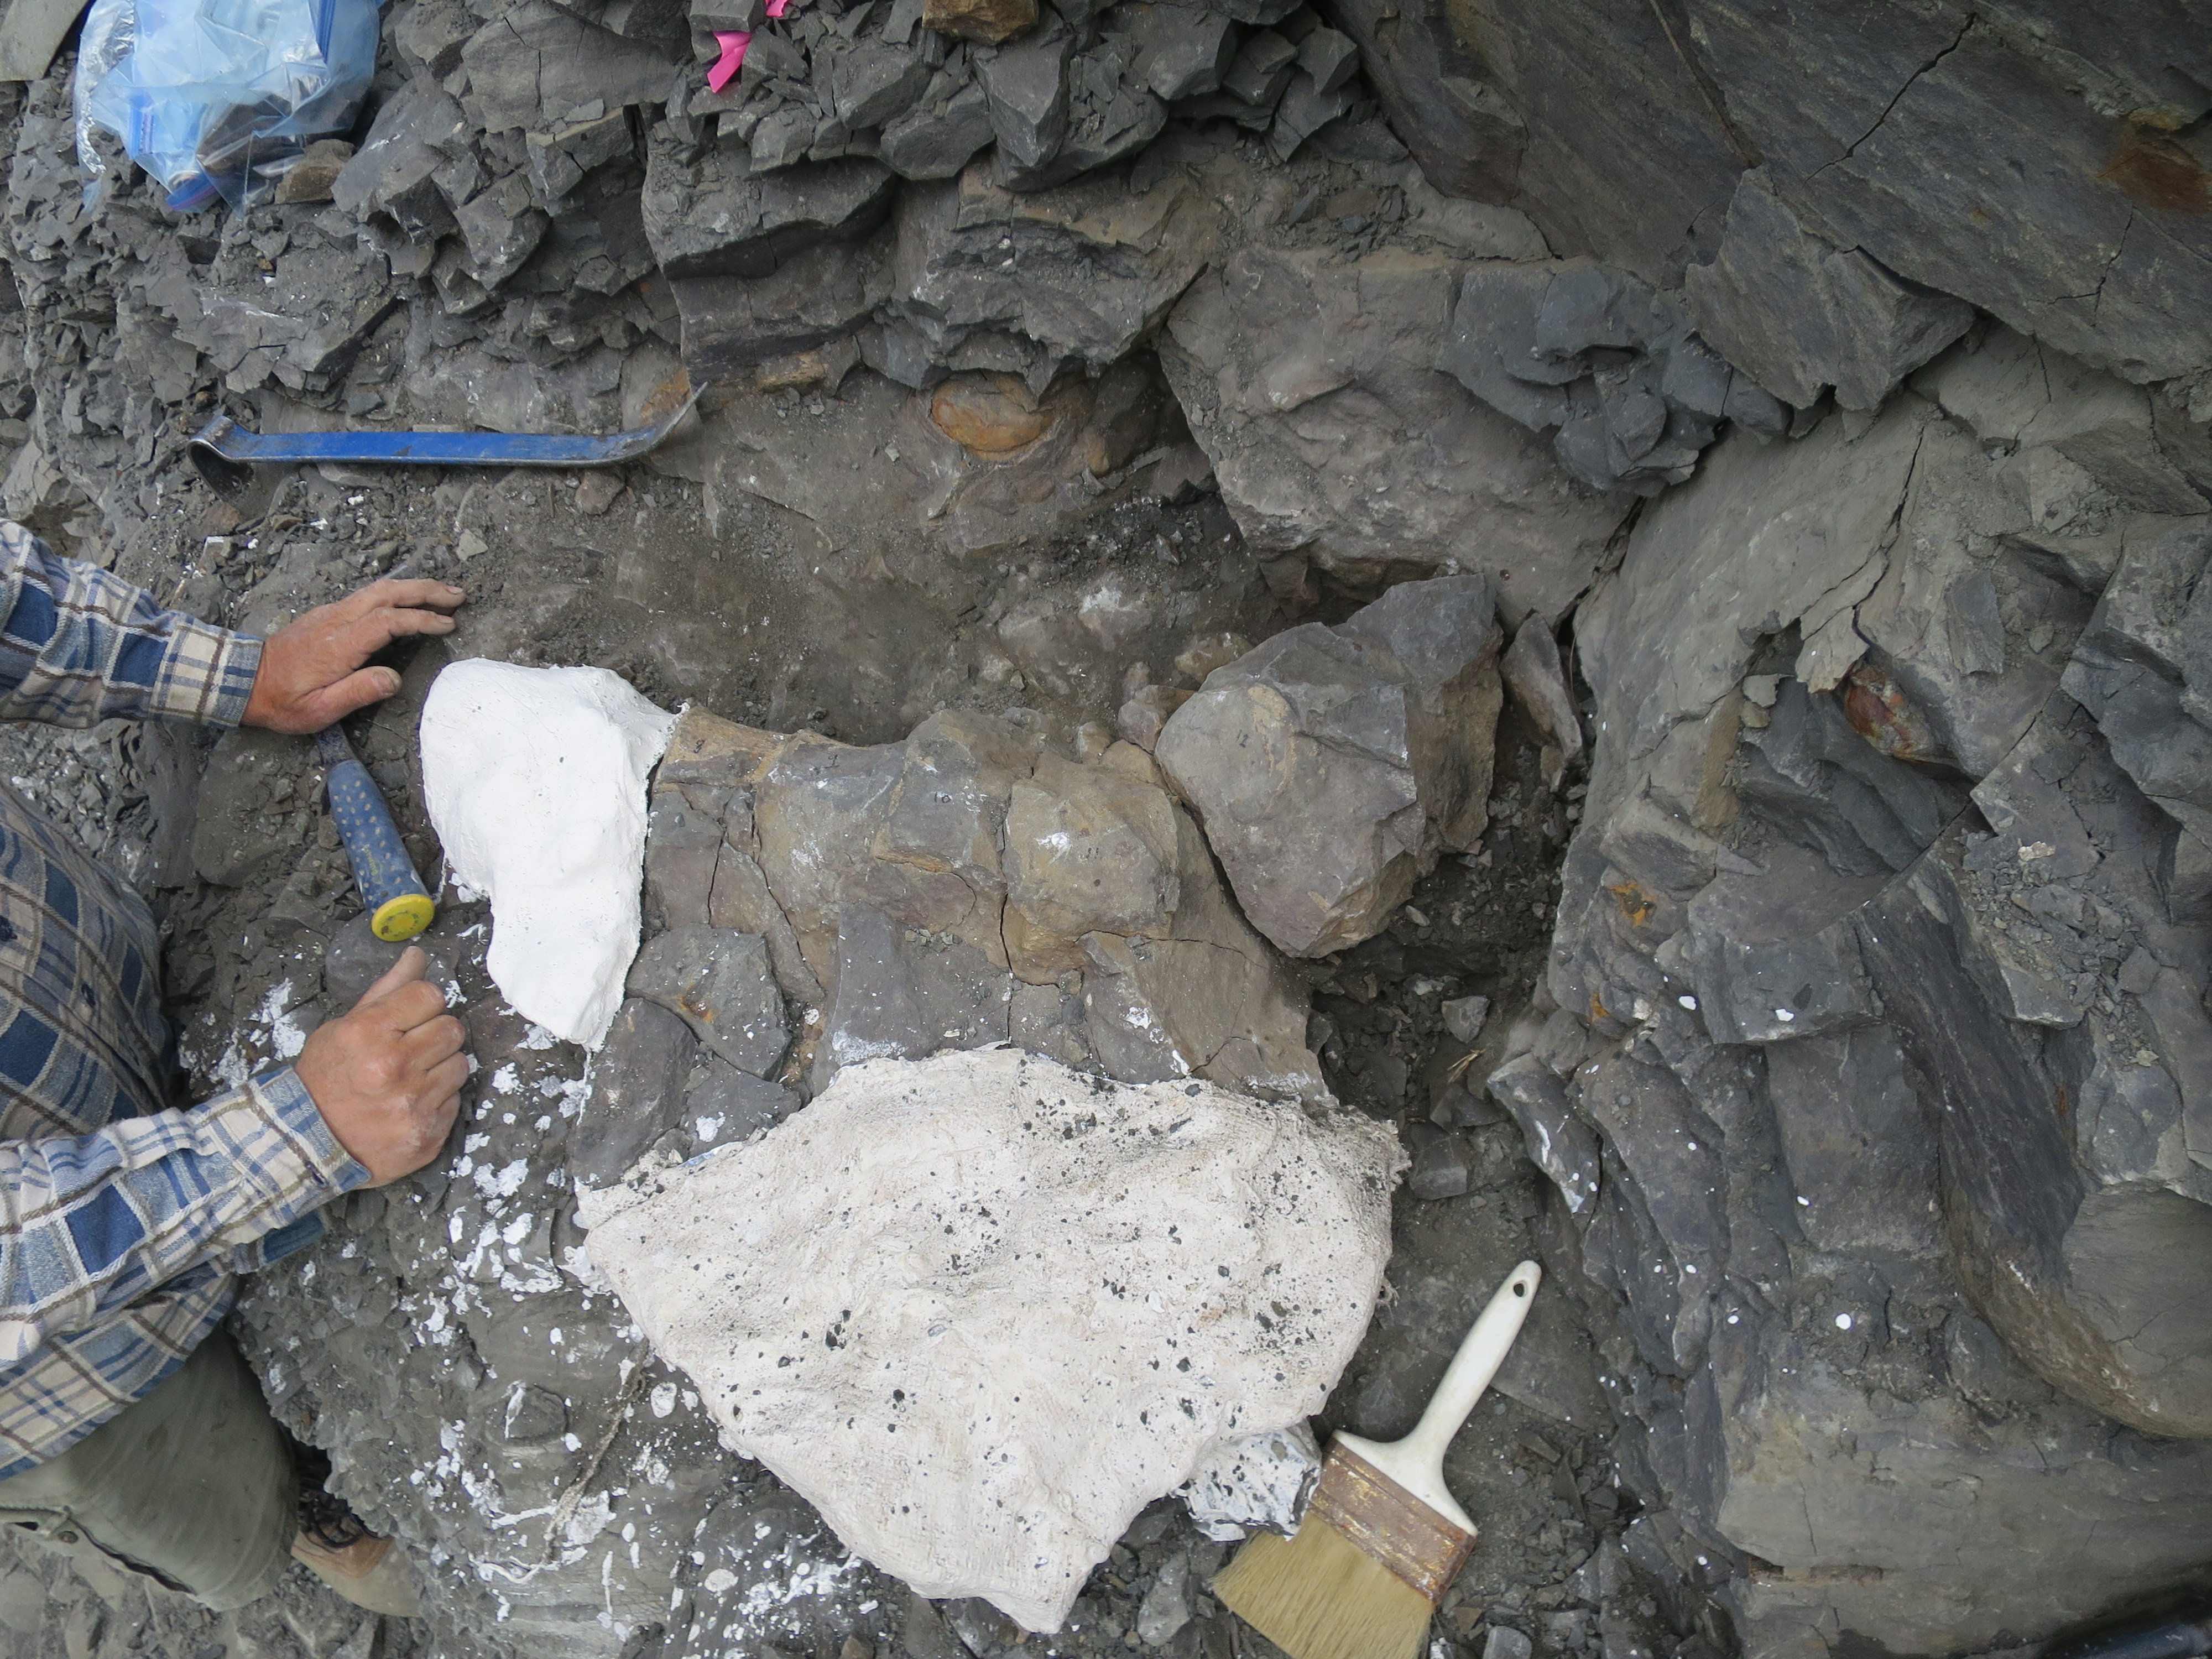 Photo by Pat Druckenmiller.  An articulated portion of the spine extends into the hill to the right of the small plaster jacket. The larger plaster jacket contains part of the elasmosaur's scapula.